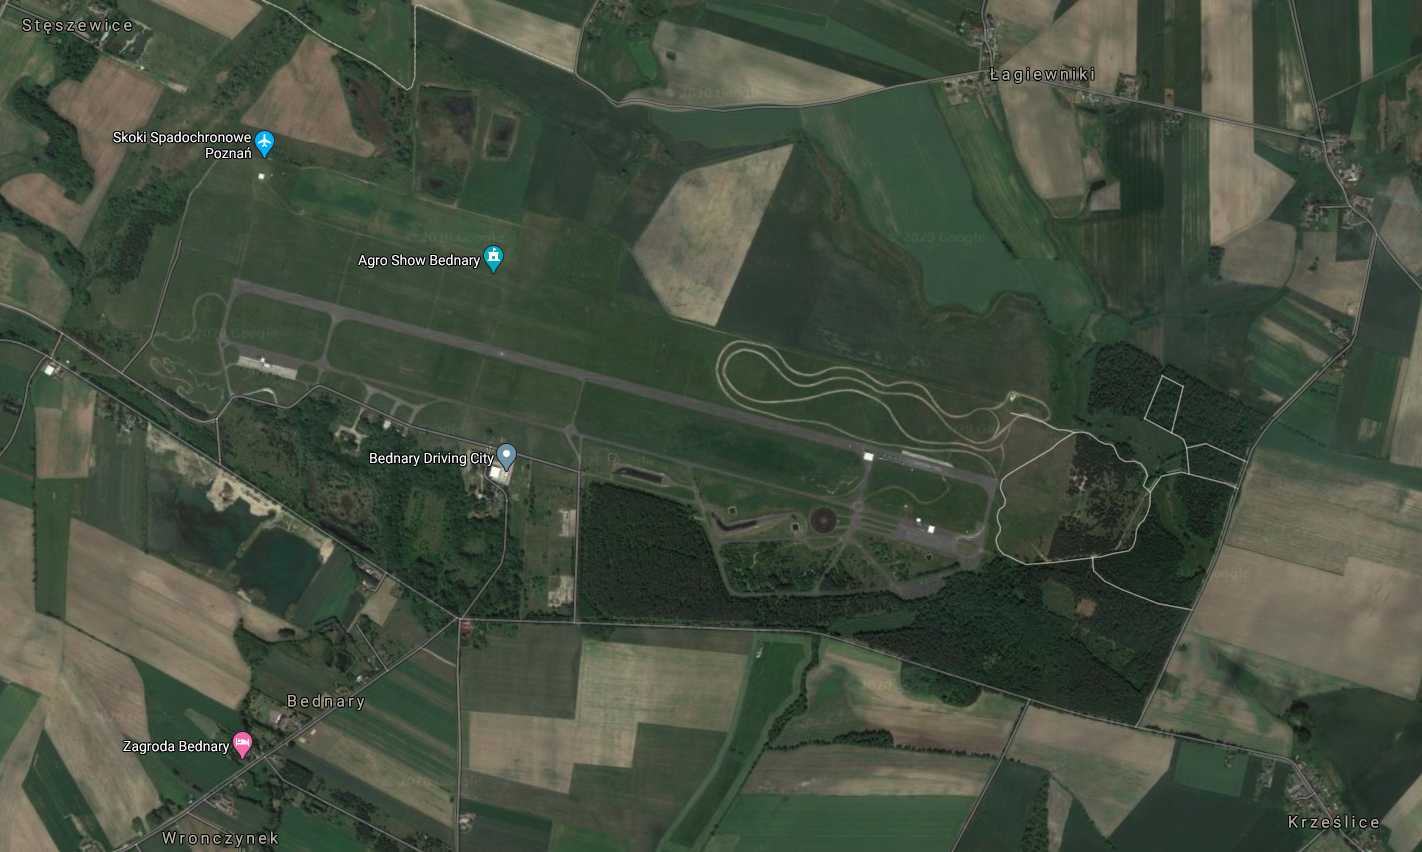 Bednary airport in a satellite view. 2018 year. Photo of LAC